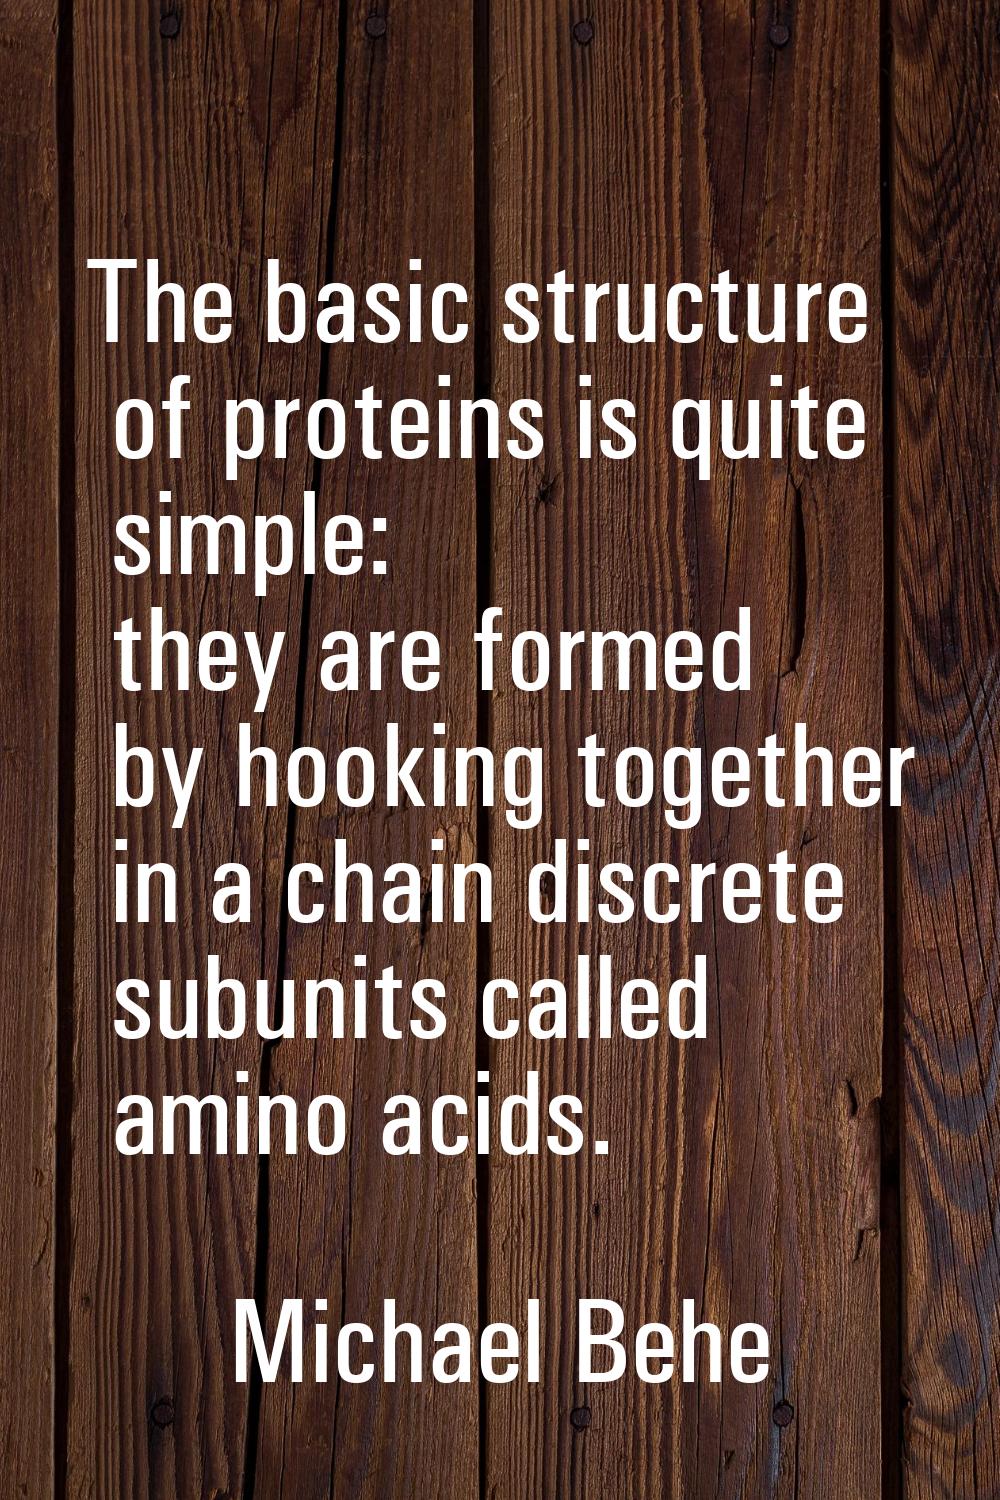 The basic structure of proteins is quite simple: they are formed by hooking together in a chain dis